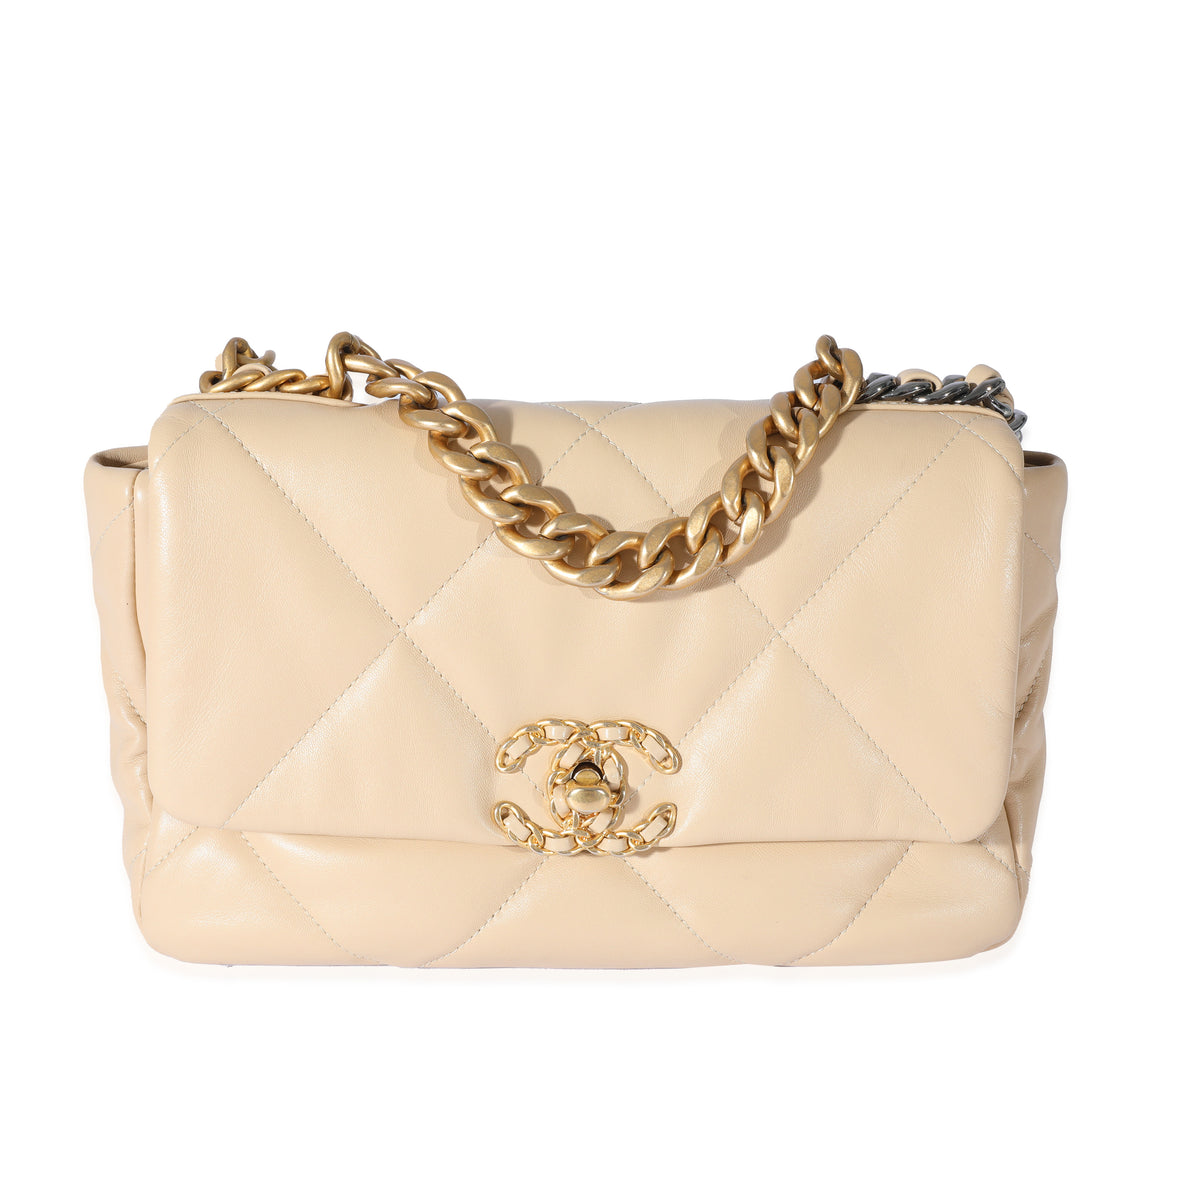 Chanel Beige Quilted Lambskin Medium Chanel 19 Flap Bag